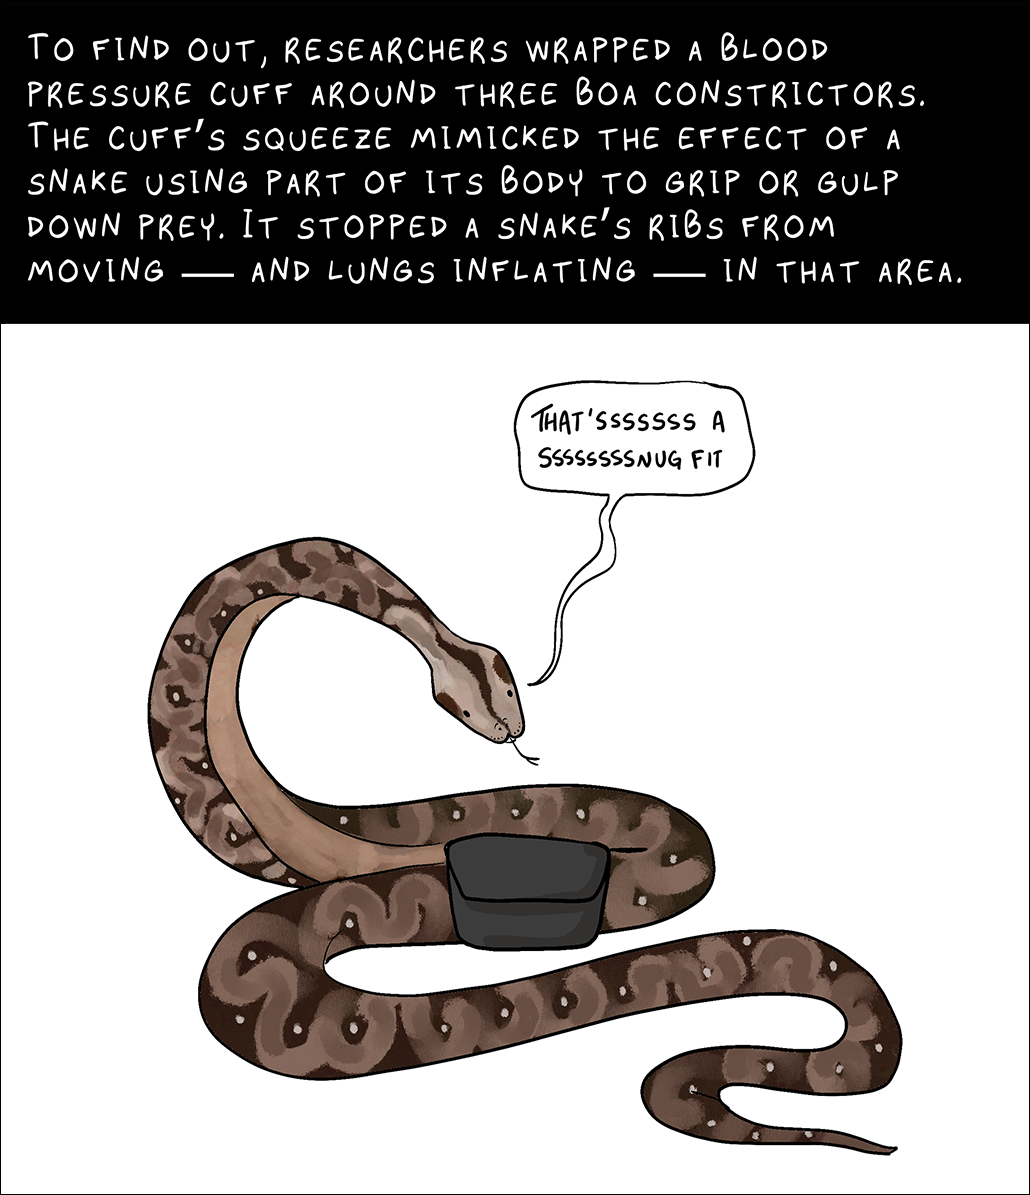 Panel 3. Text above: To find out, the researchers placed a blood pressure cuff on three boas.  The compression of the cuff mimicked the effect of a snake using part of its body to grab or swallow its prey.  This stopped the movement of the snake's ribs and the inflation of the lungs in that area.  Image: Boa constrictor with blood pressure cuff.  The snake says 